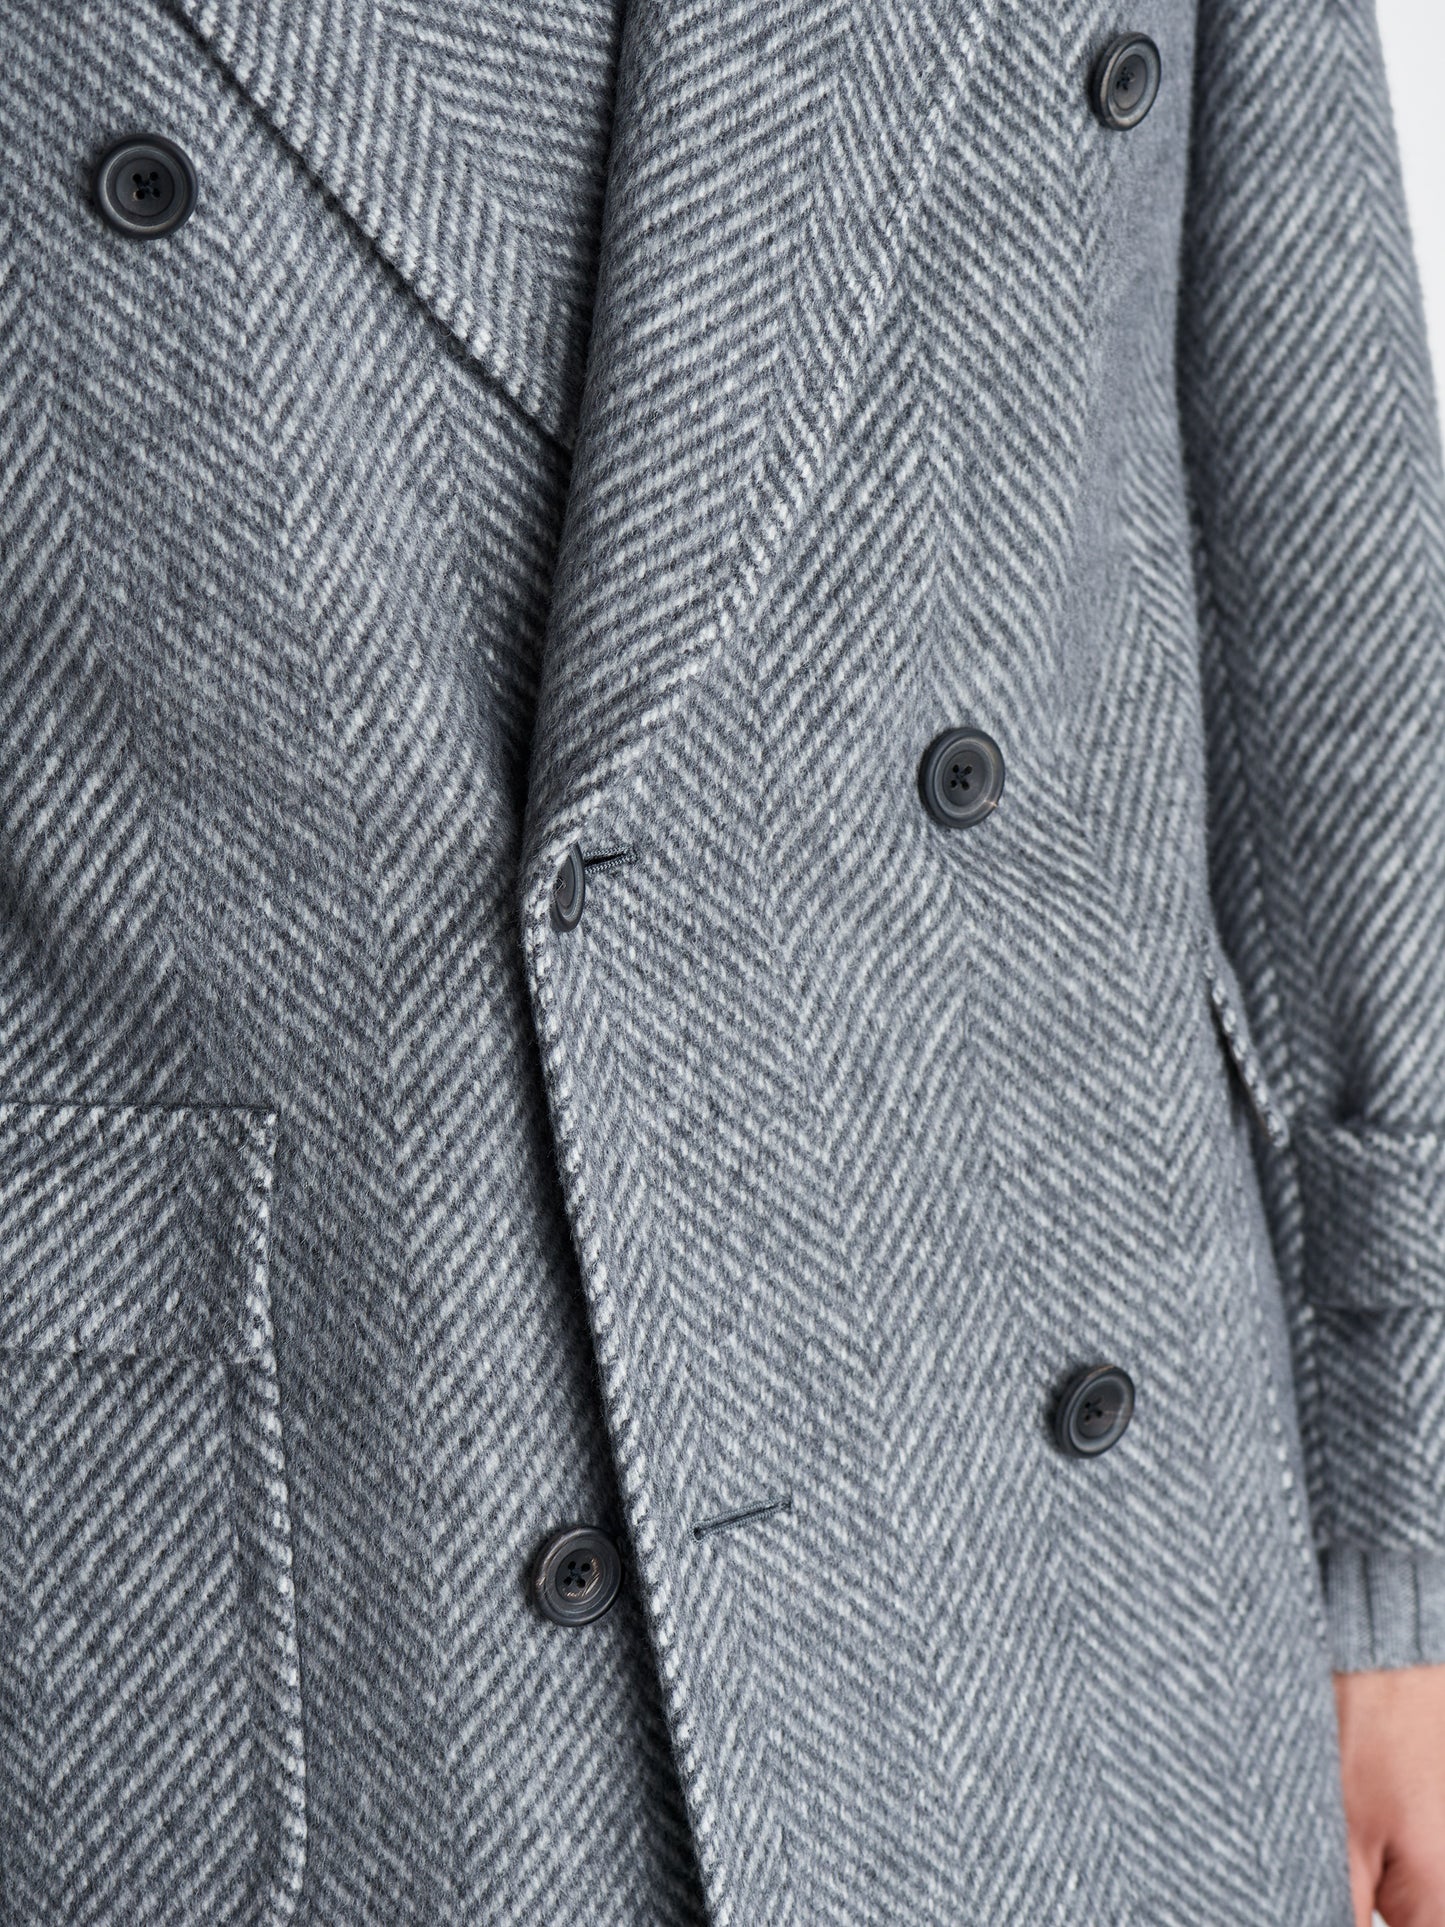 Wool Unstructured Double Breasted Overcoat Grey Twill Detail Model Image